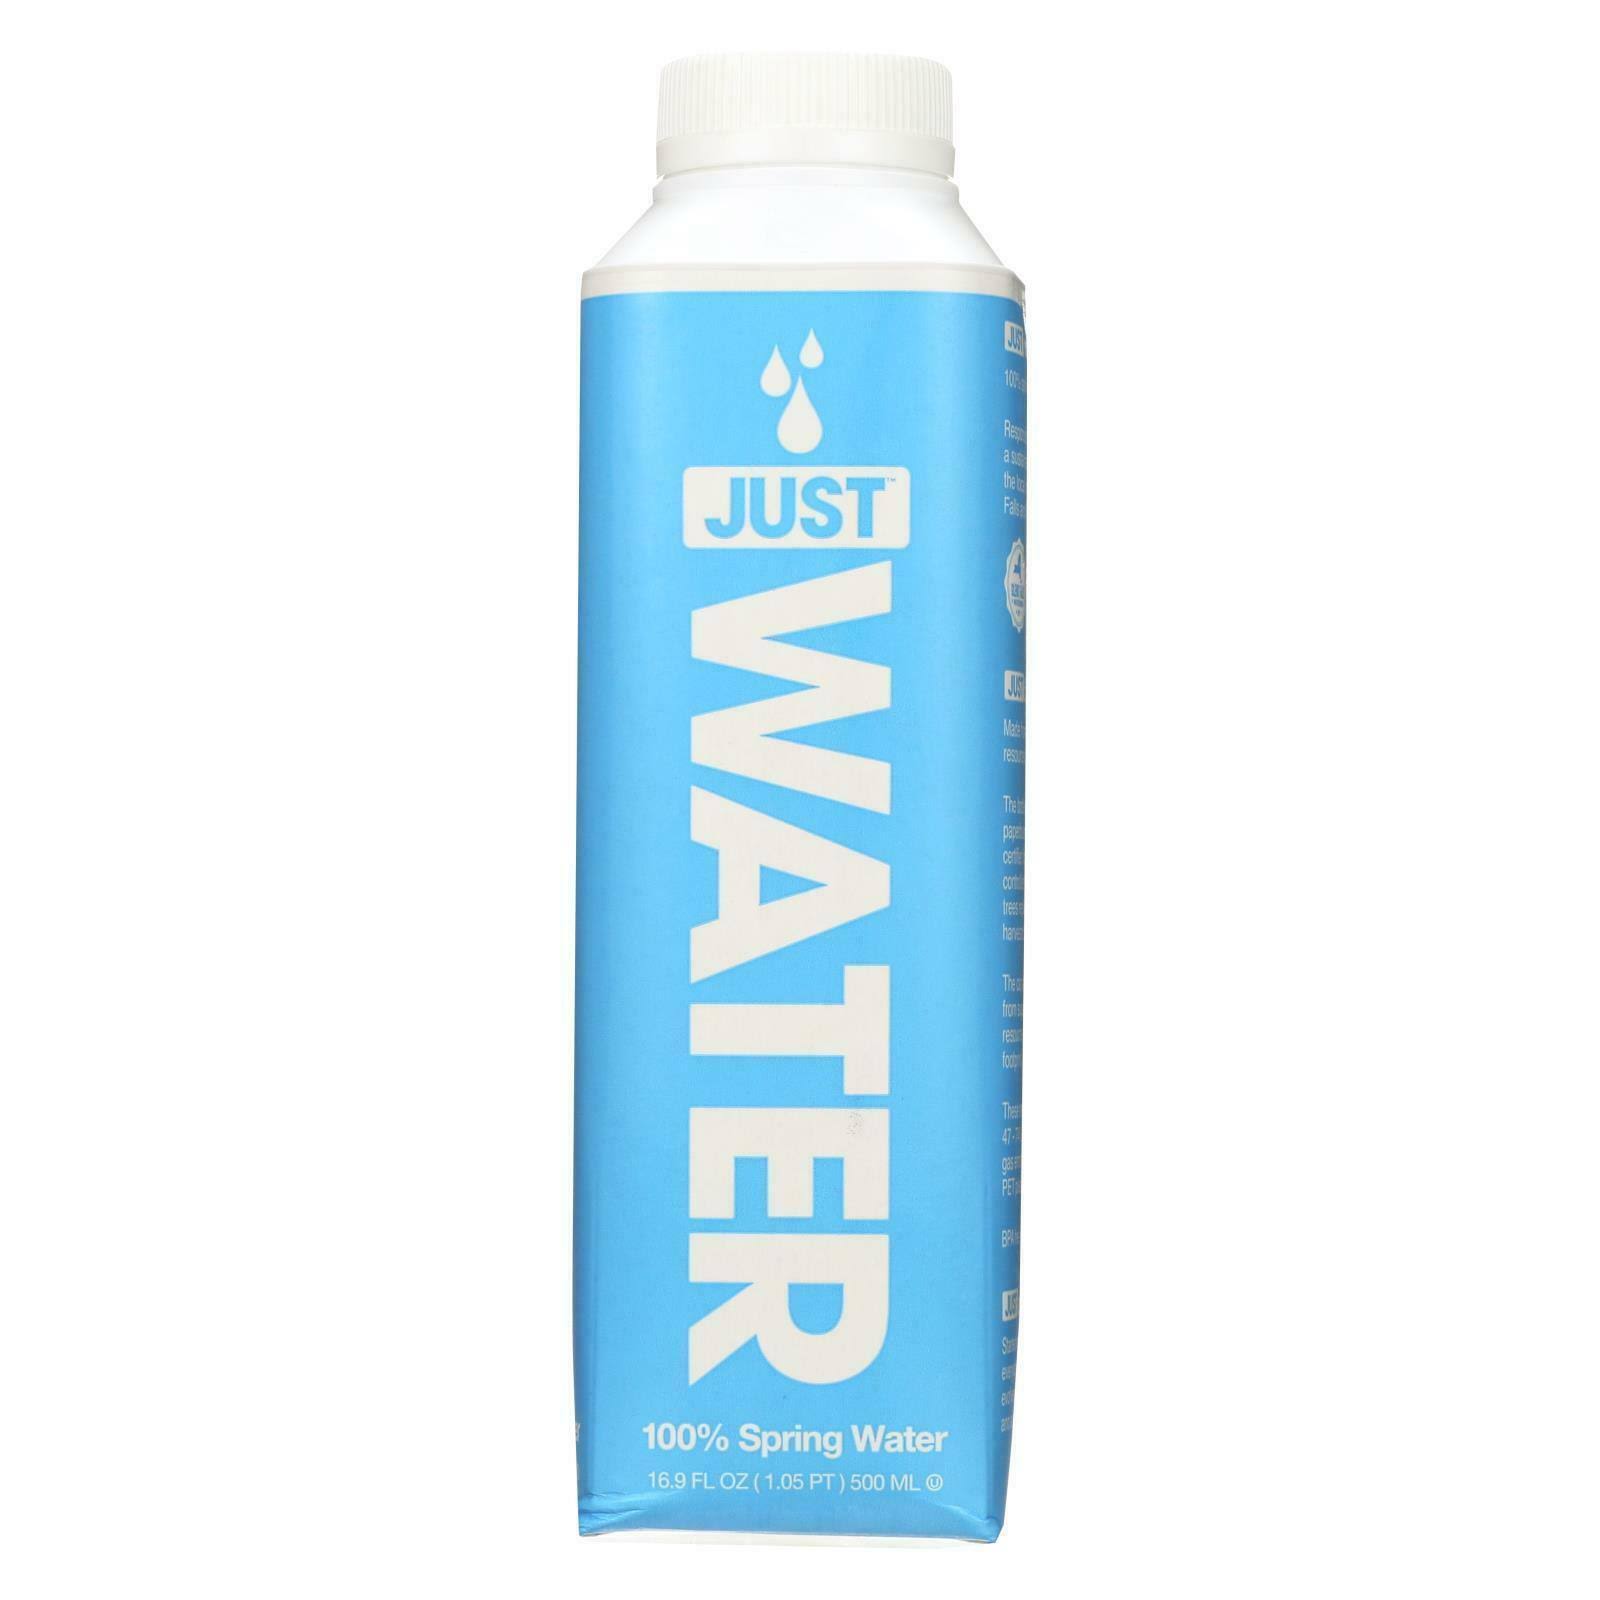 Just 100 Percent Spring Water - 16.9oz